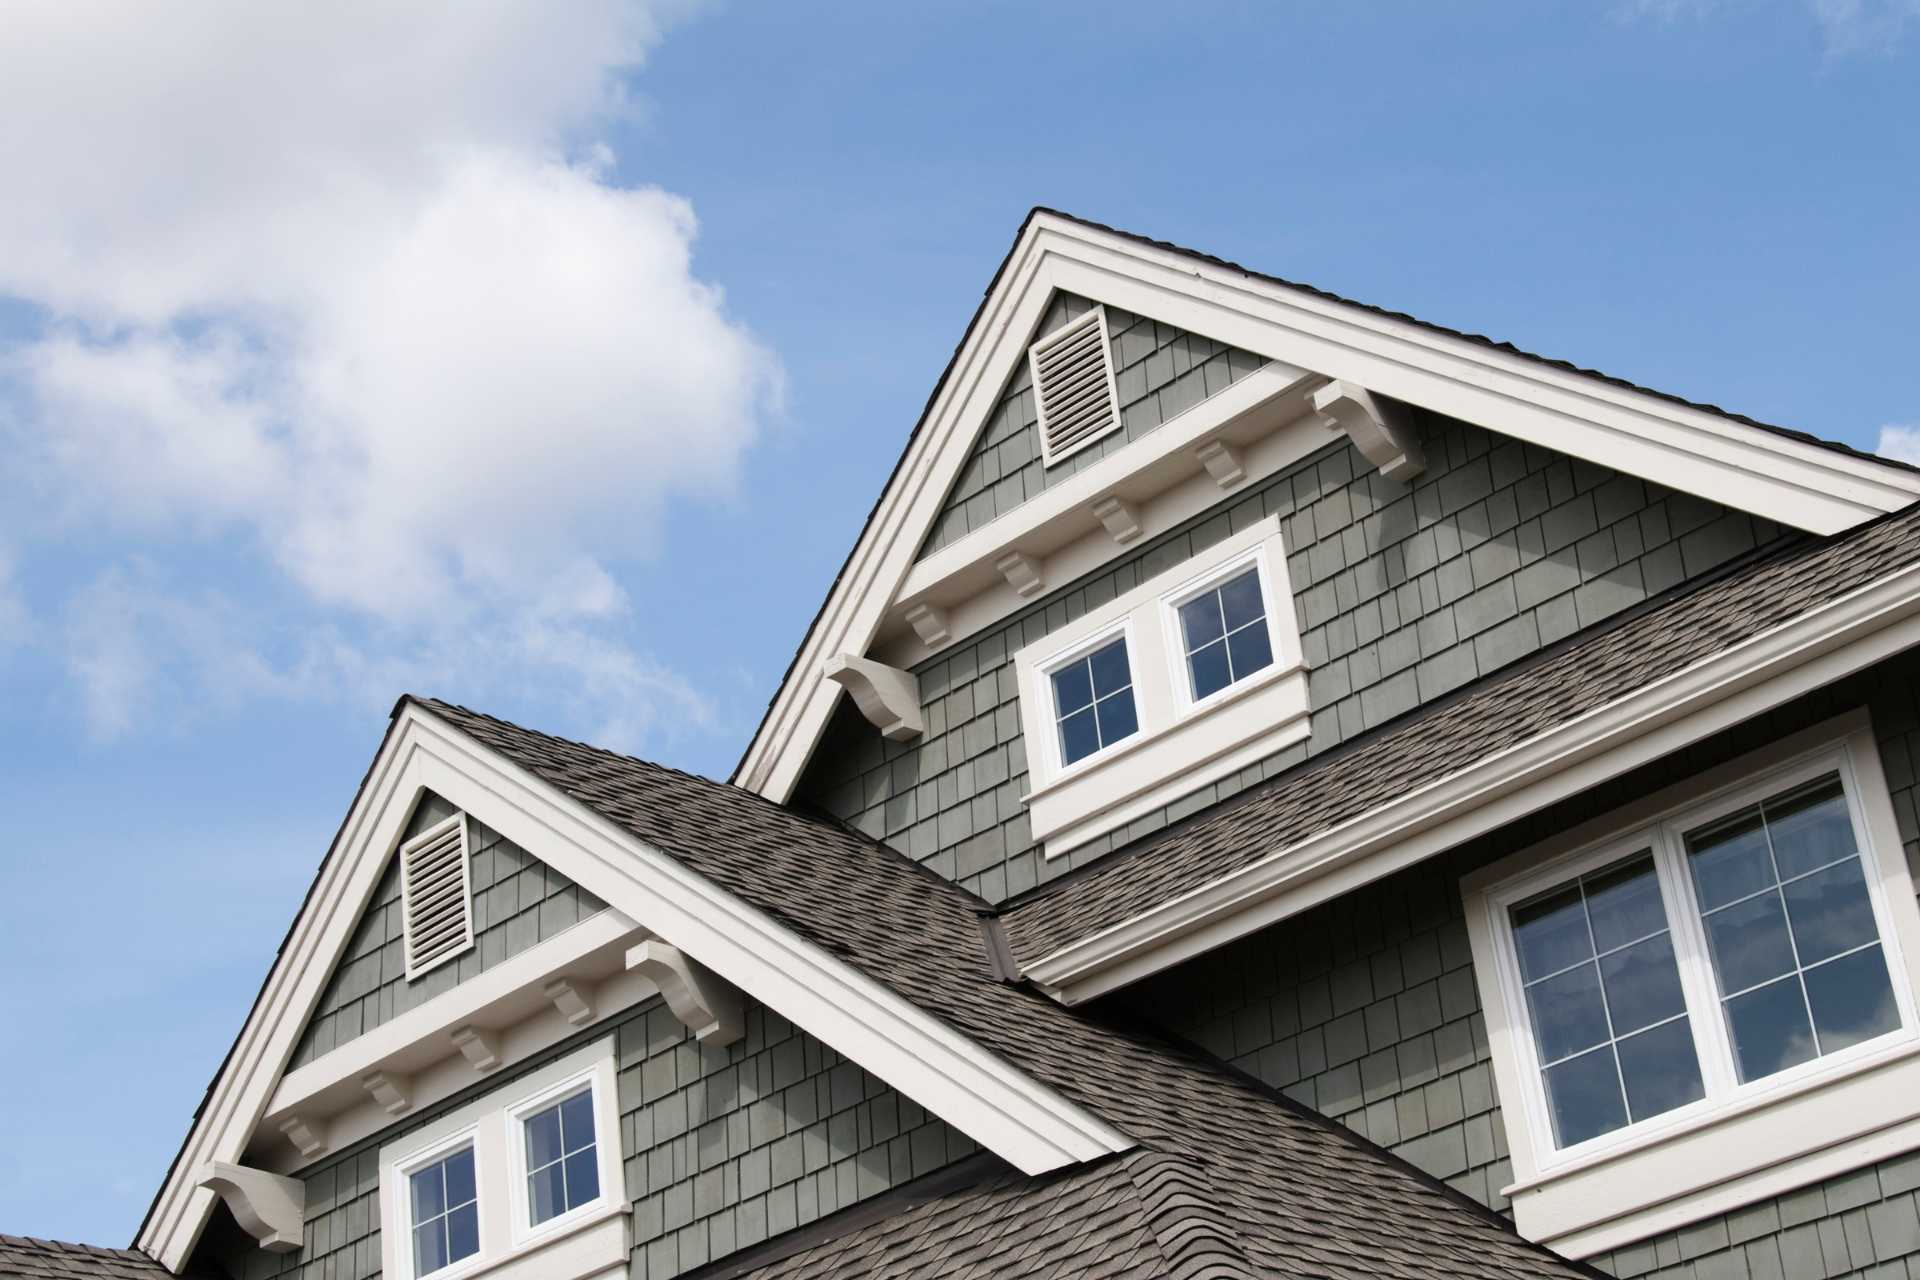 Understanding the Environmental Impact of Different Siding Materials